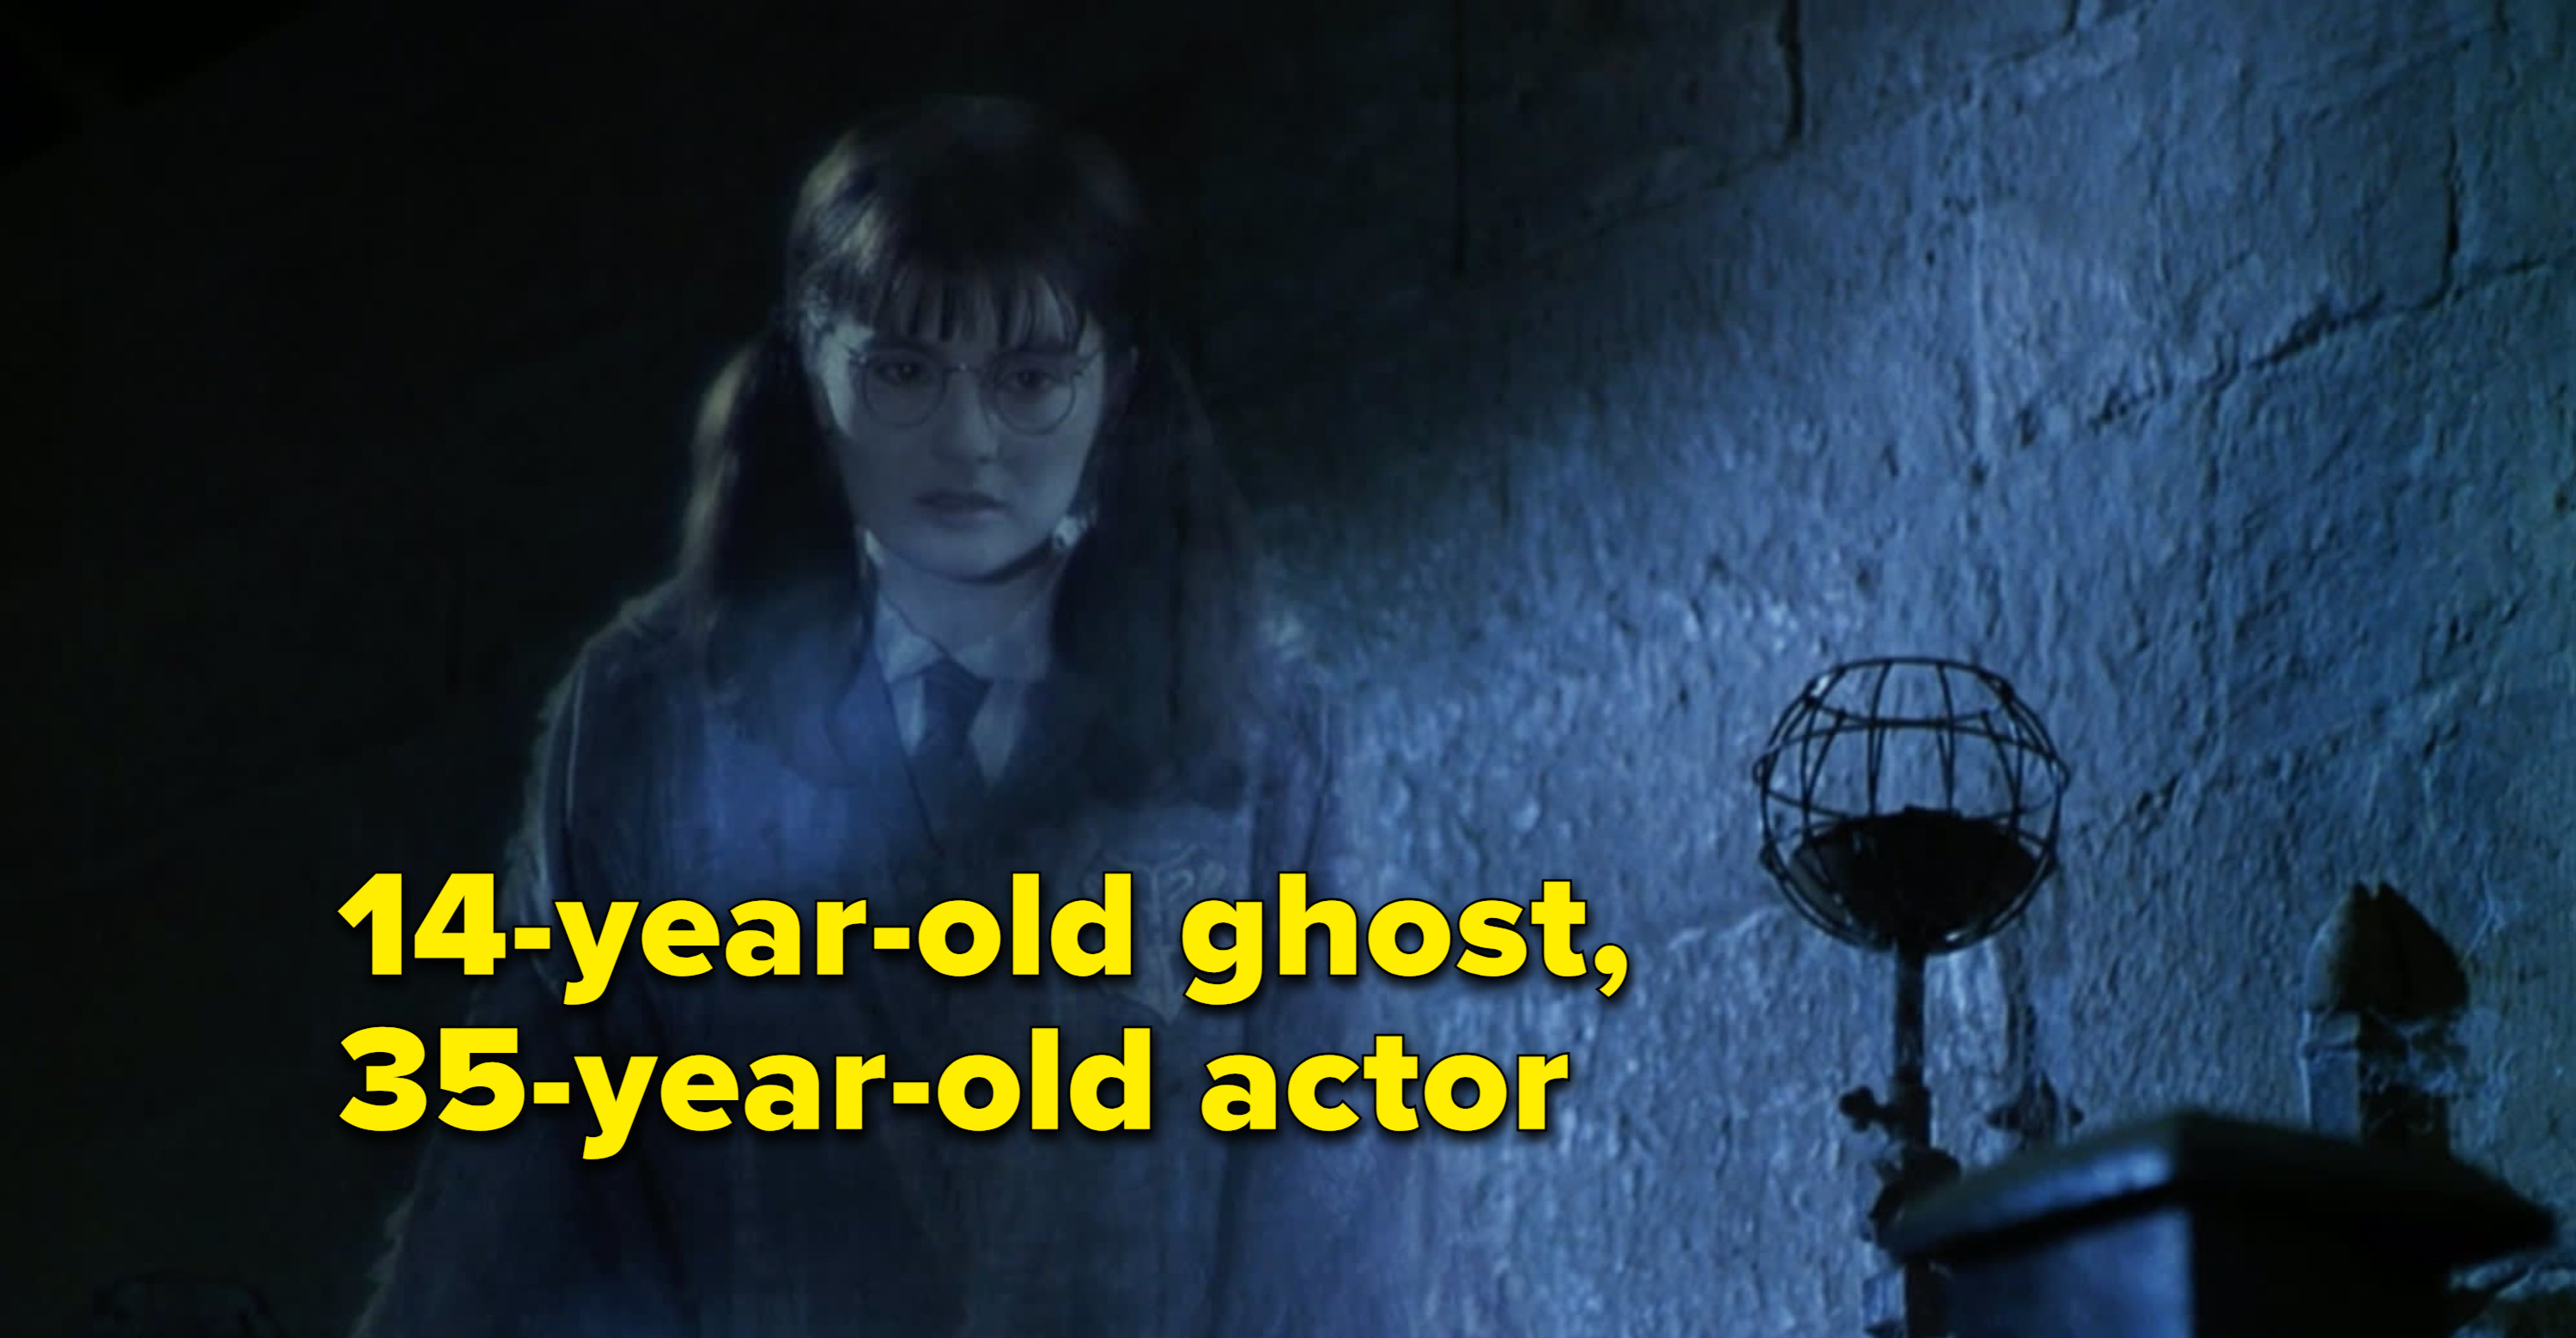 14-year-old ghost, 35-year-old actor